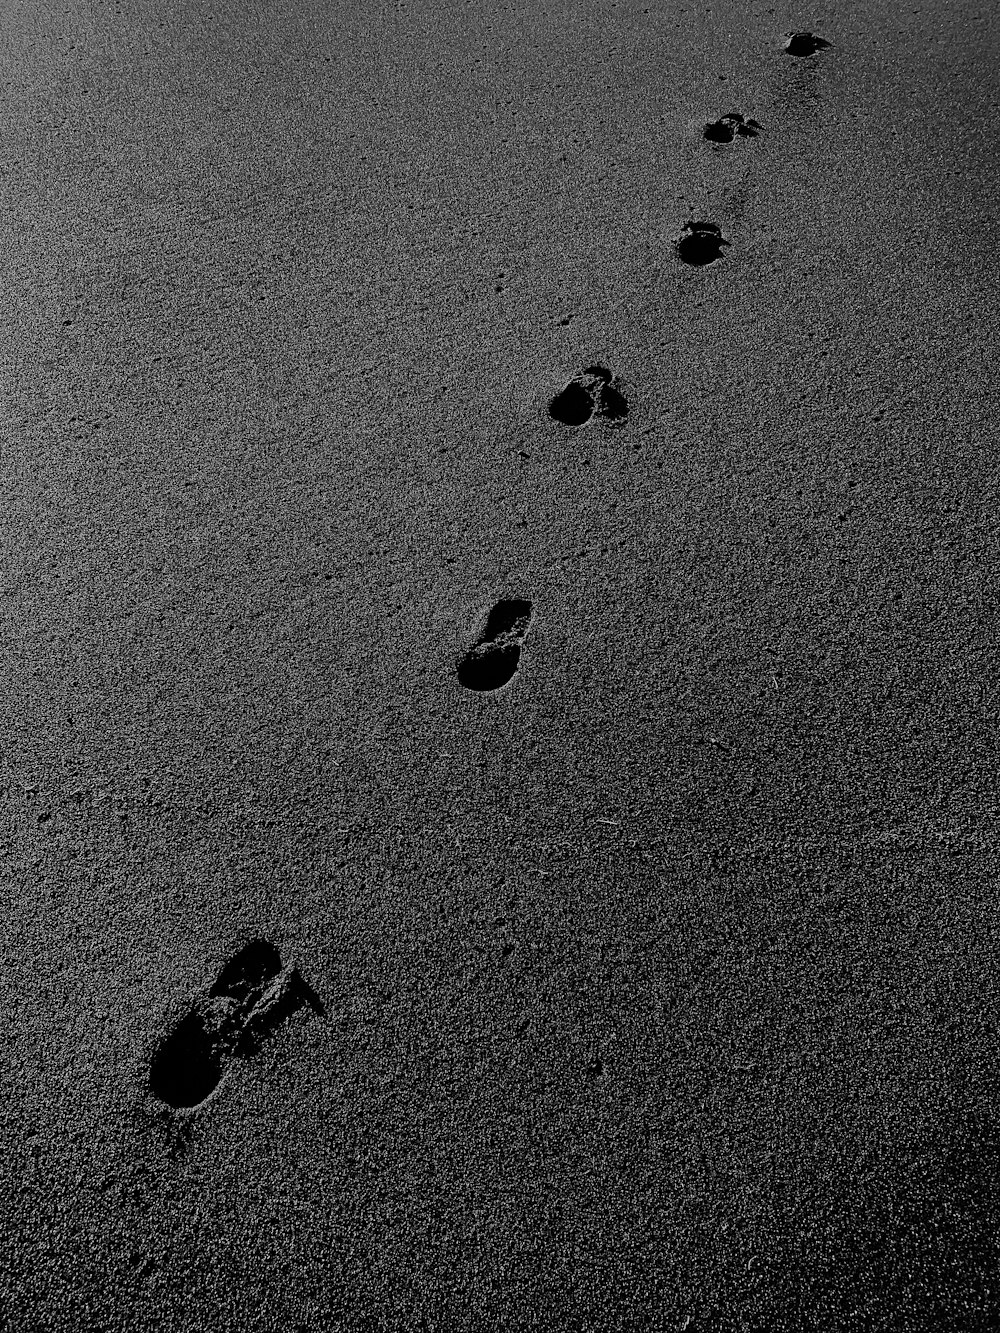 sand with footprints